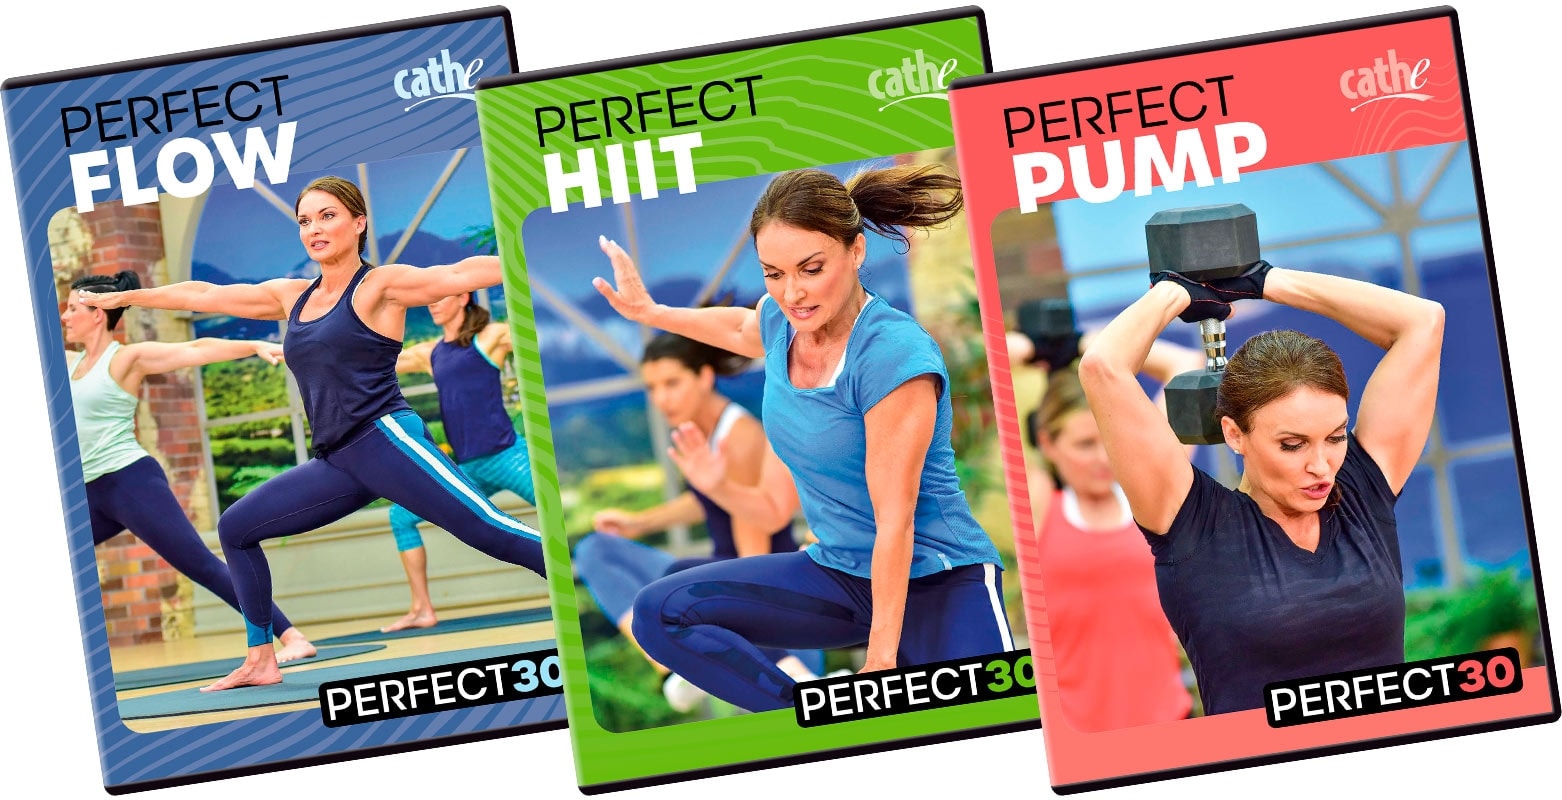 Cathe Friedrich's PERFECT30 is a balanced weekly workout program